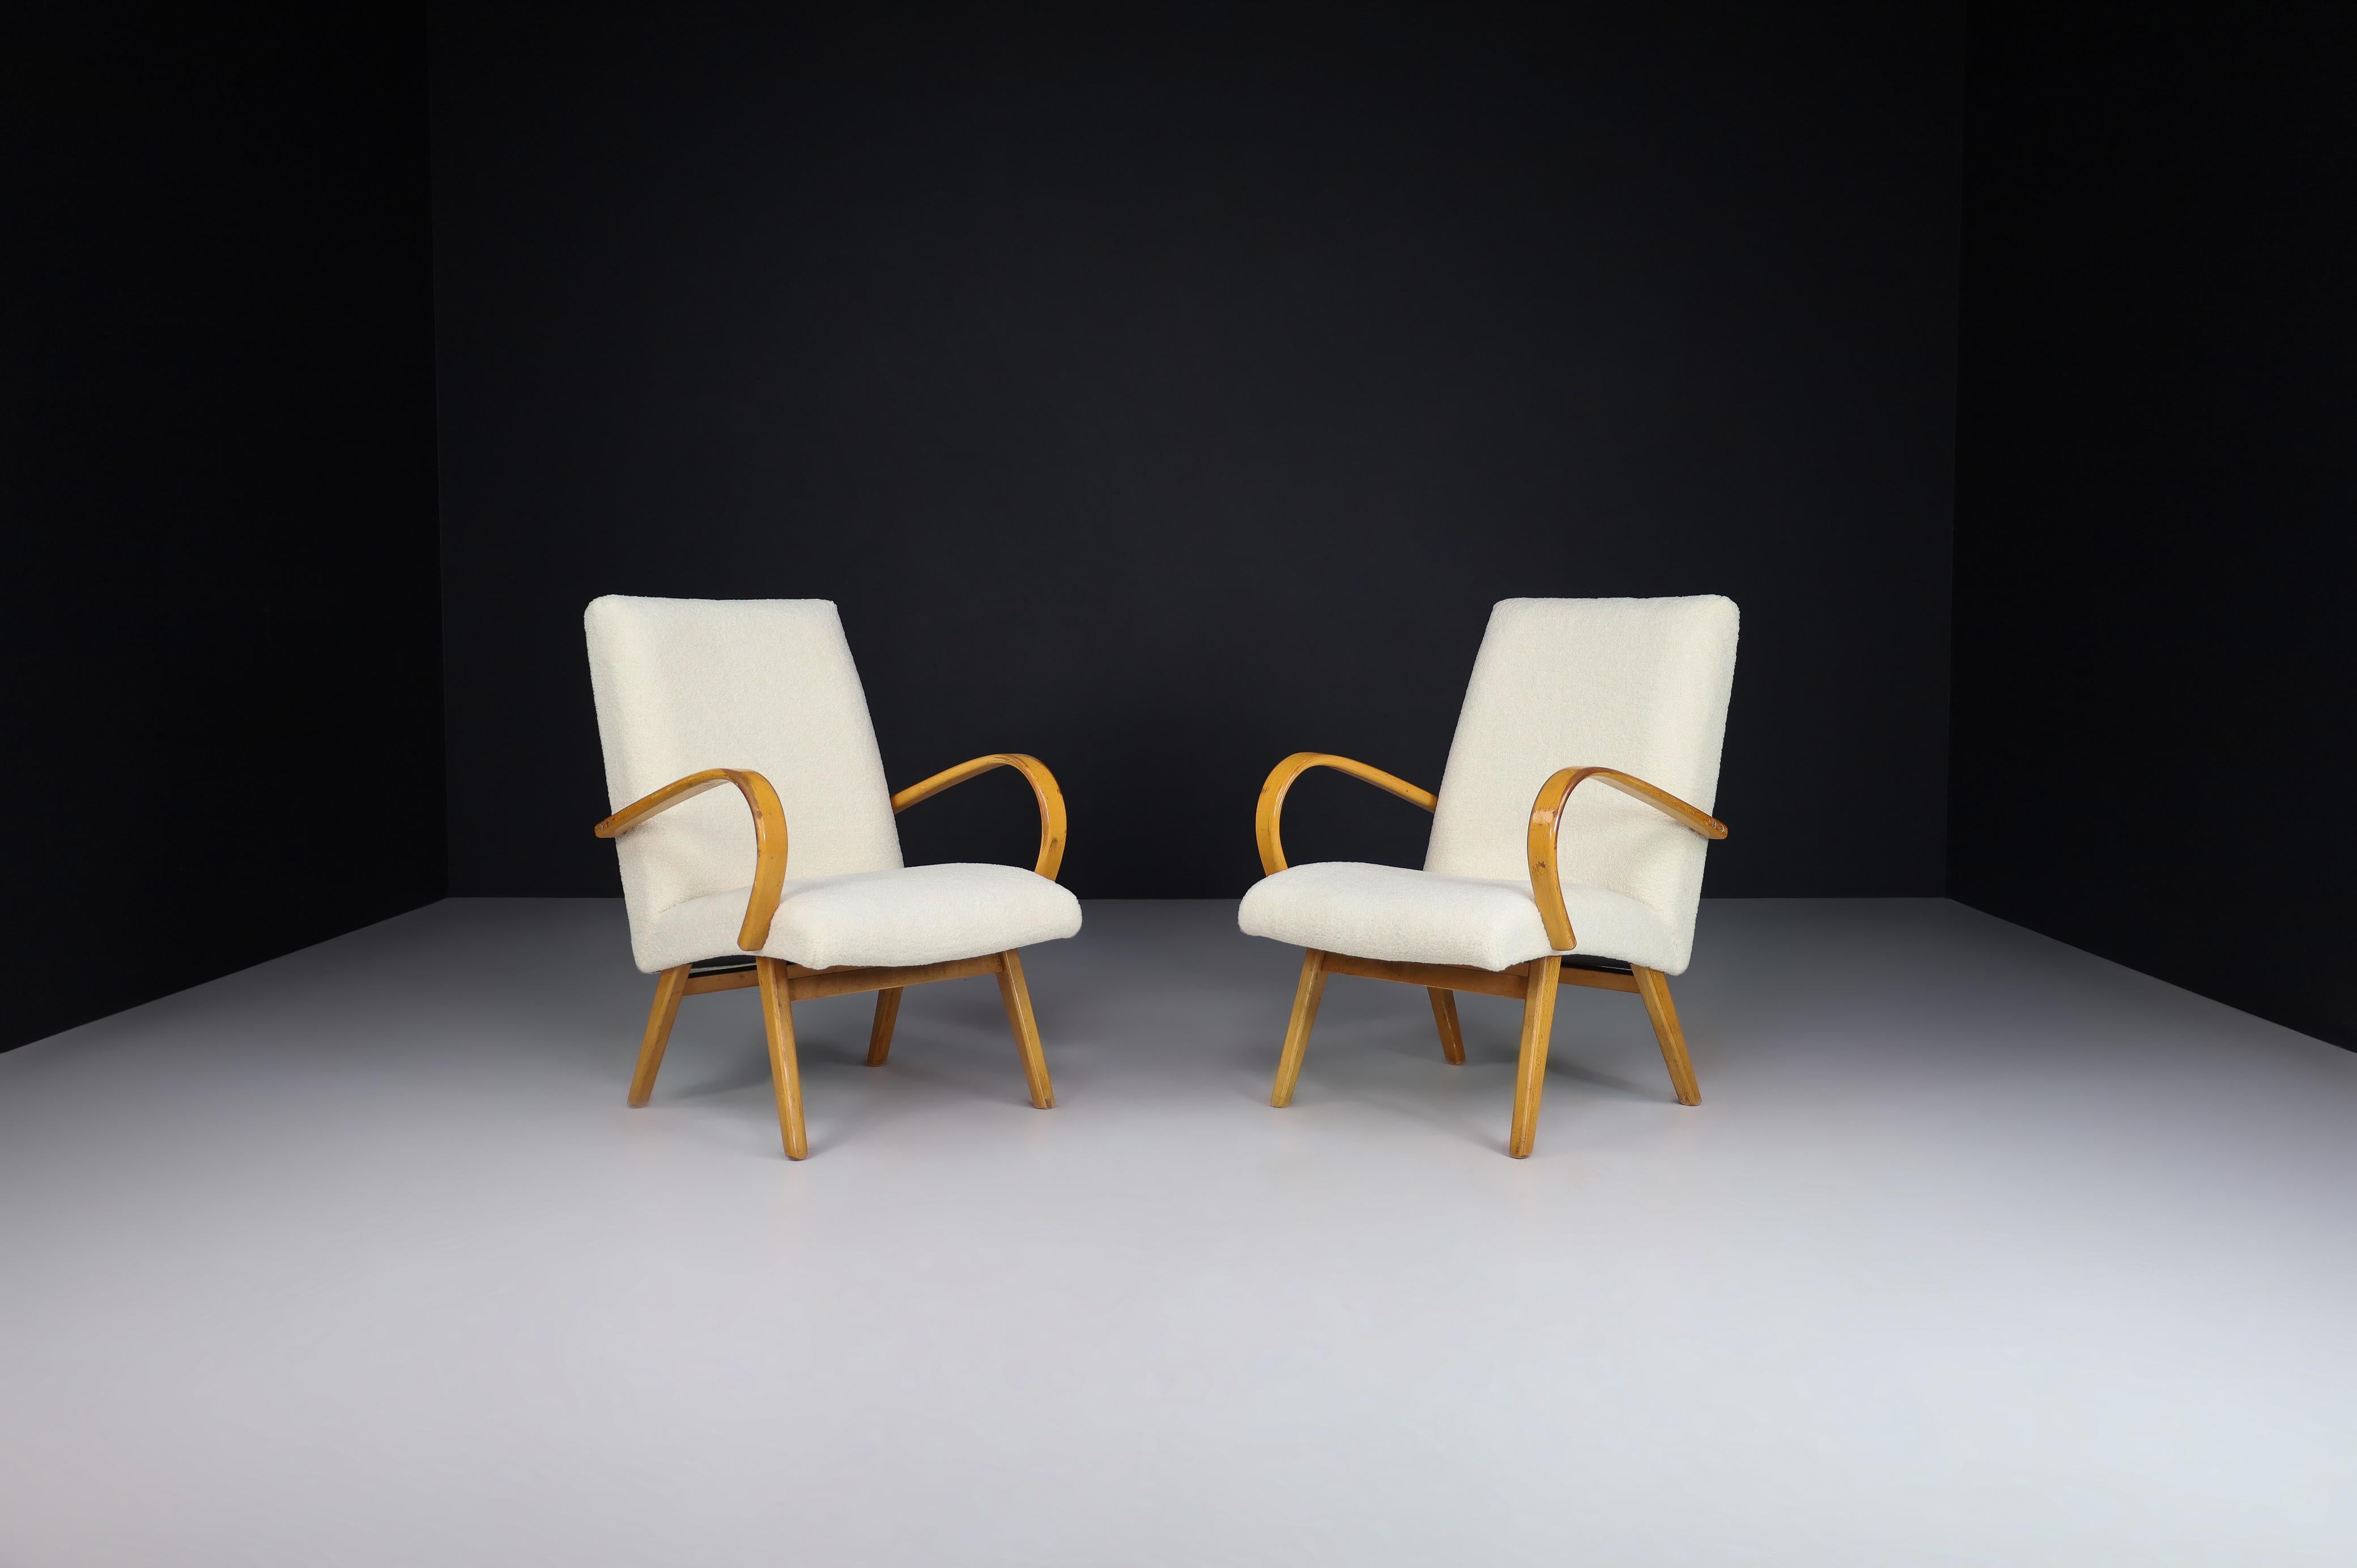 Blond bentwood armchairs manufactured and designed in Praque, 1950s. 

Blond bentwood armchairs manufactured and designed in Praque, 1950s. These armchairs have just been reupholstered with teddy fabric and have a nice elegant bentwood frame. It